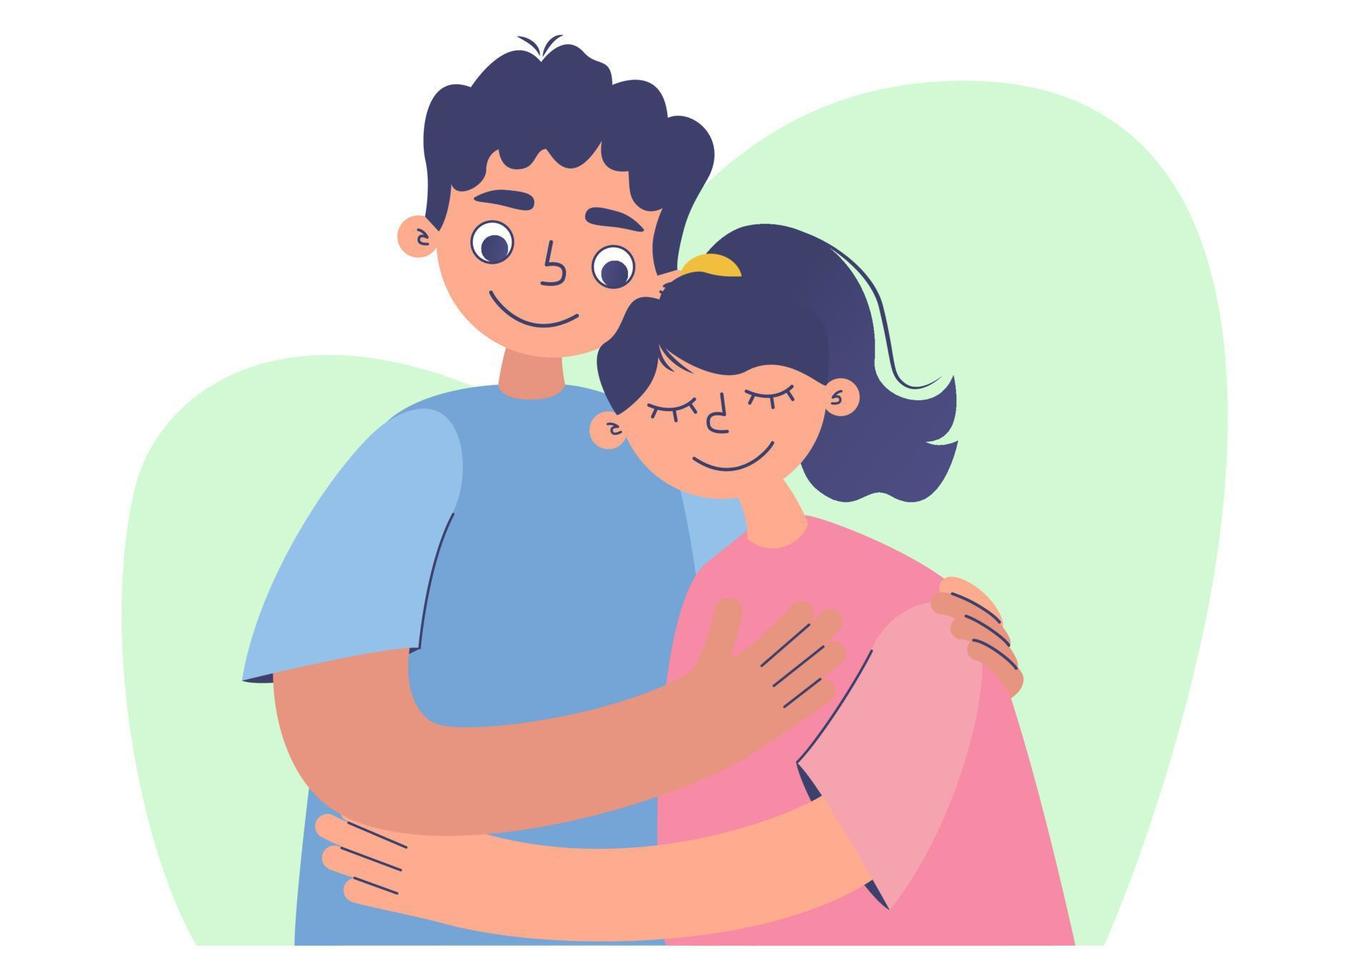 Young loving smiling couple boy and girl standing hugging embracing each other vector